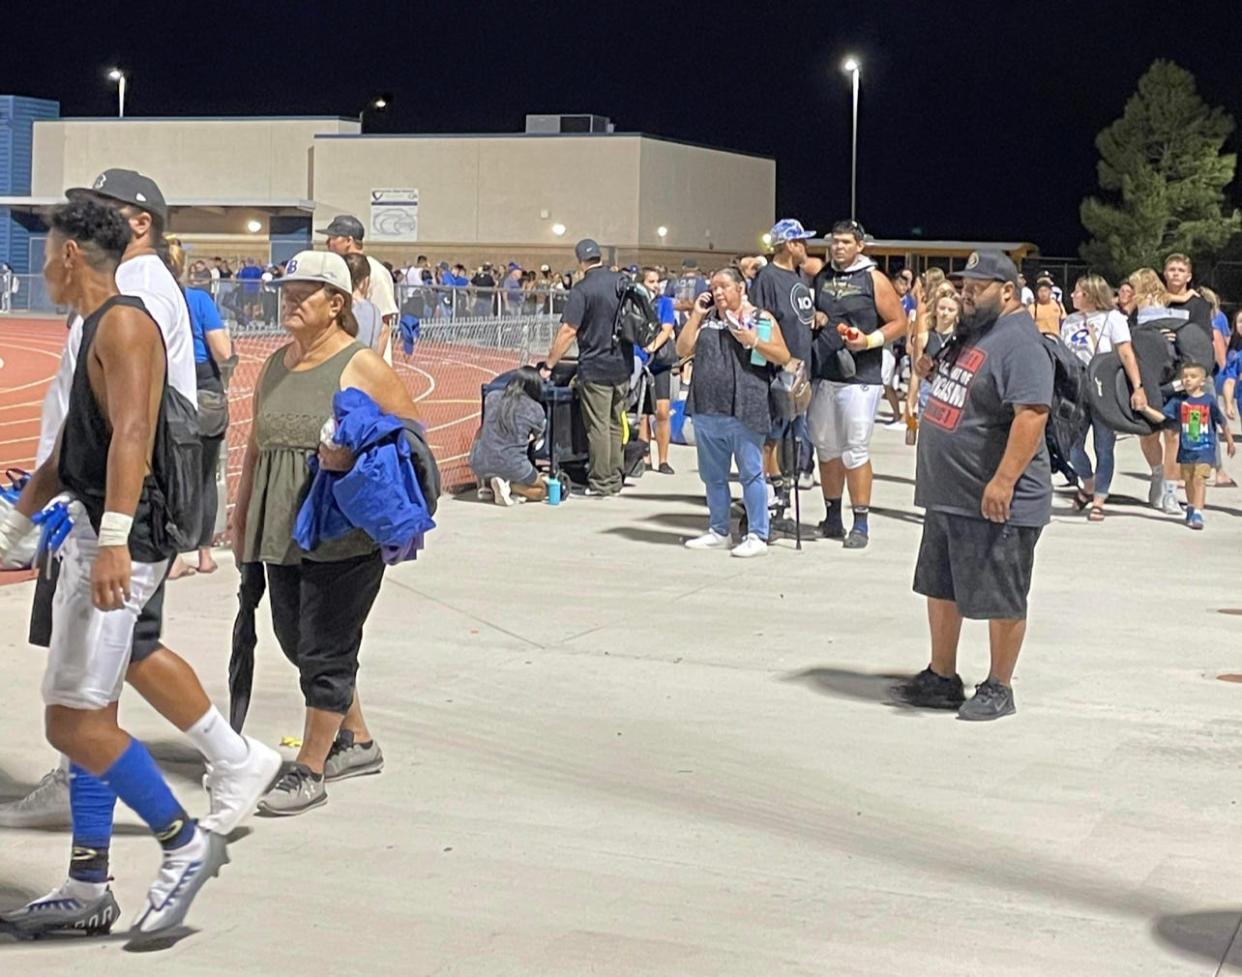 Visitors, players, coaches and students were moved to one end of the Silverado High School stadium in Victorville after shots rang out Friday night as a preseason scrimmage football game was ending.